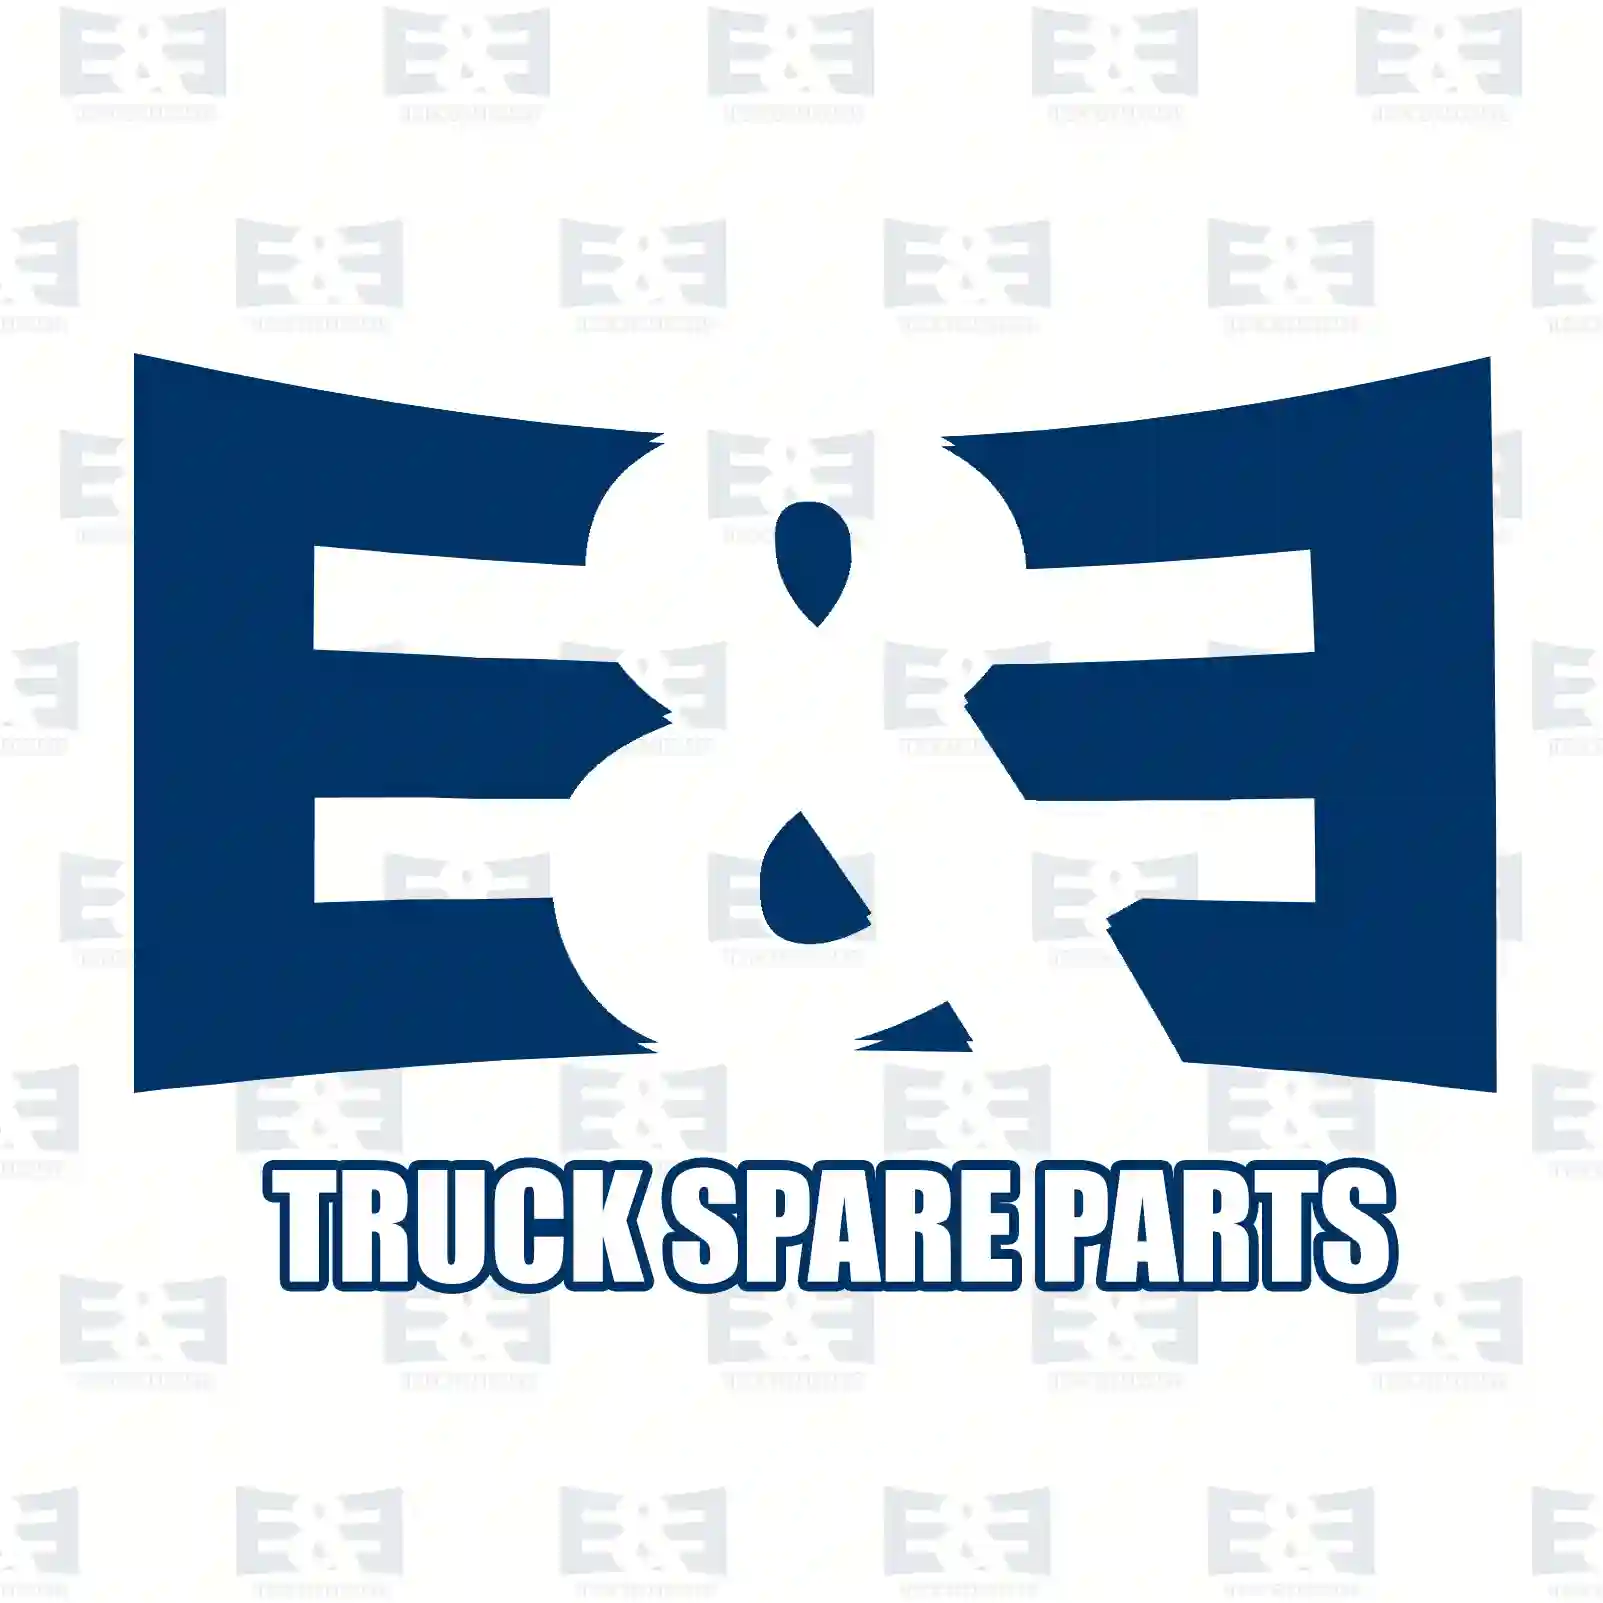 Front grill, without gas springs, emblem and rubber holder, 2E2292503, 5010445793 ||  2E2292503 E&E Truck Spare Parts | Truck Spare Parts, Auotomotive Spare Parts Front grill, without gas springs, emblem and rubber holder, 2E2292503, 5010445793 ||  2E2292503 E&E Truck Spare Parts | Truck Spare Parts, Auotomotive Spare Parts